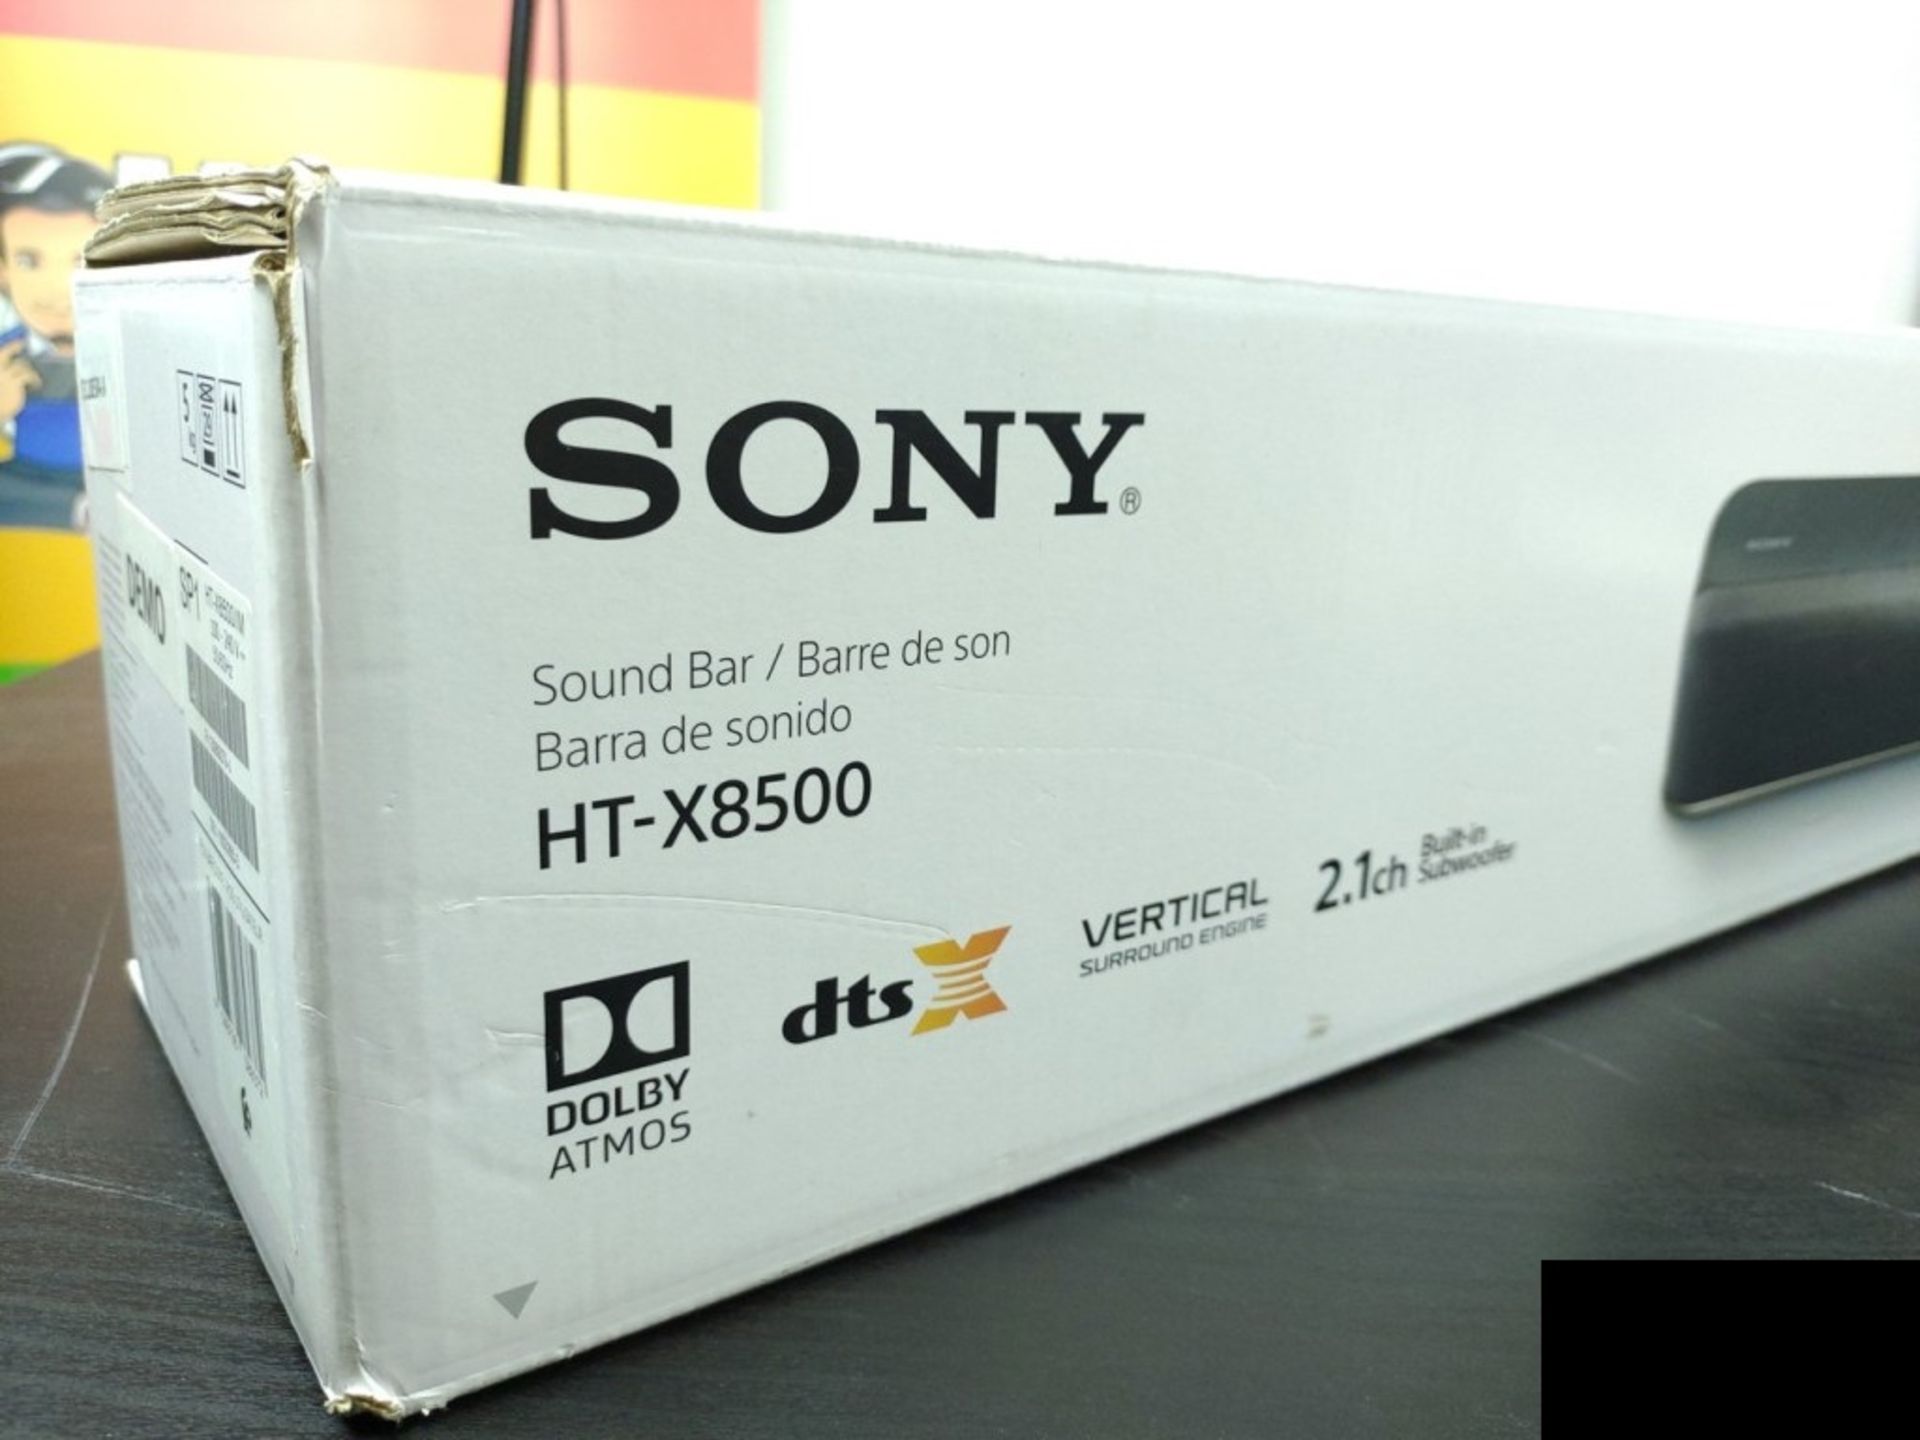 1 BOXED SONY HT-X8500 2.1CH DOLBY ATMOS SOUNDBAR WITH BUILT-IN SUBWOOFER RRP Â£349.99